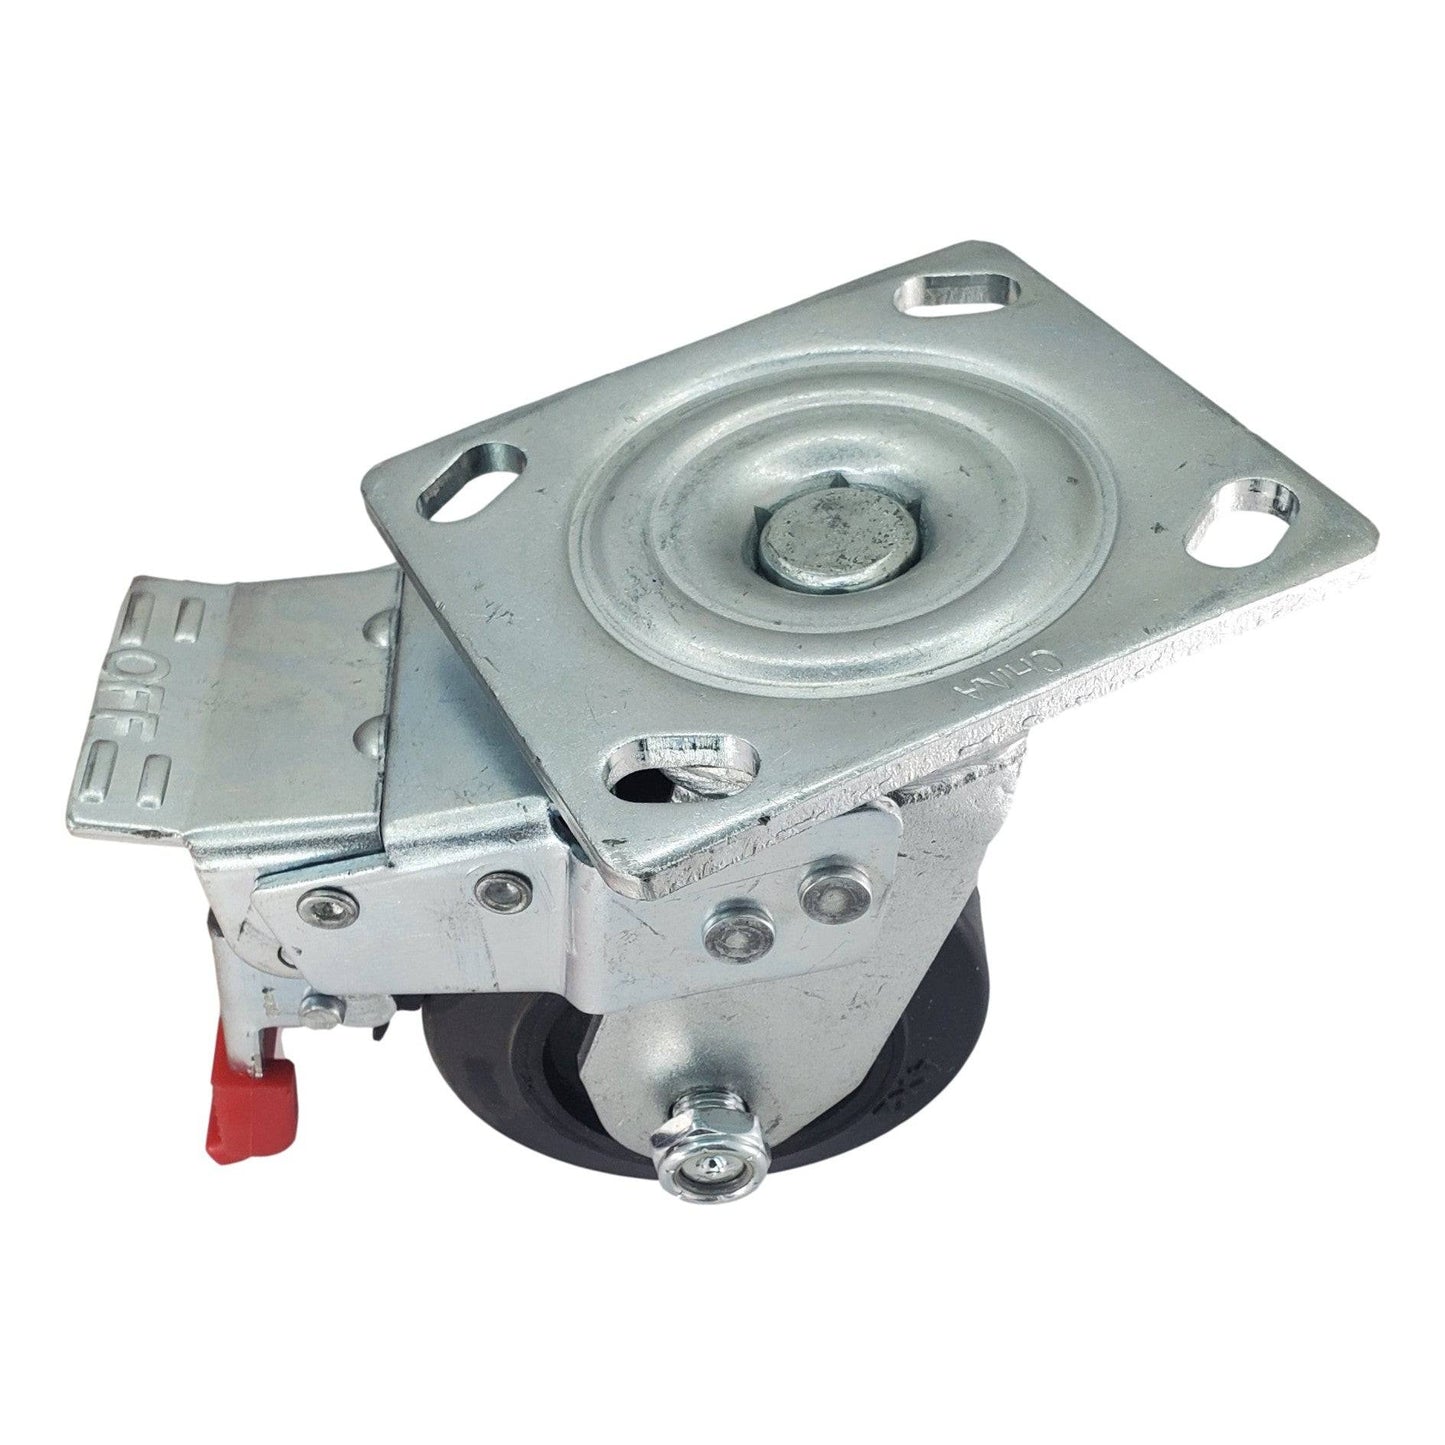 4" x 2" Mold-On Rubber Cast Swivel Caster w/ Total Lock Brake - 400 lbs. Cap. - Durable Superior Casters